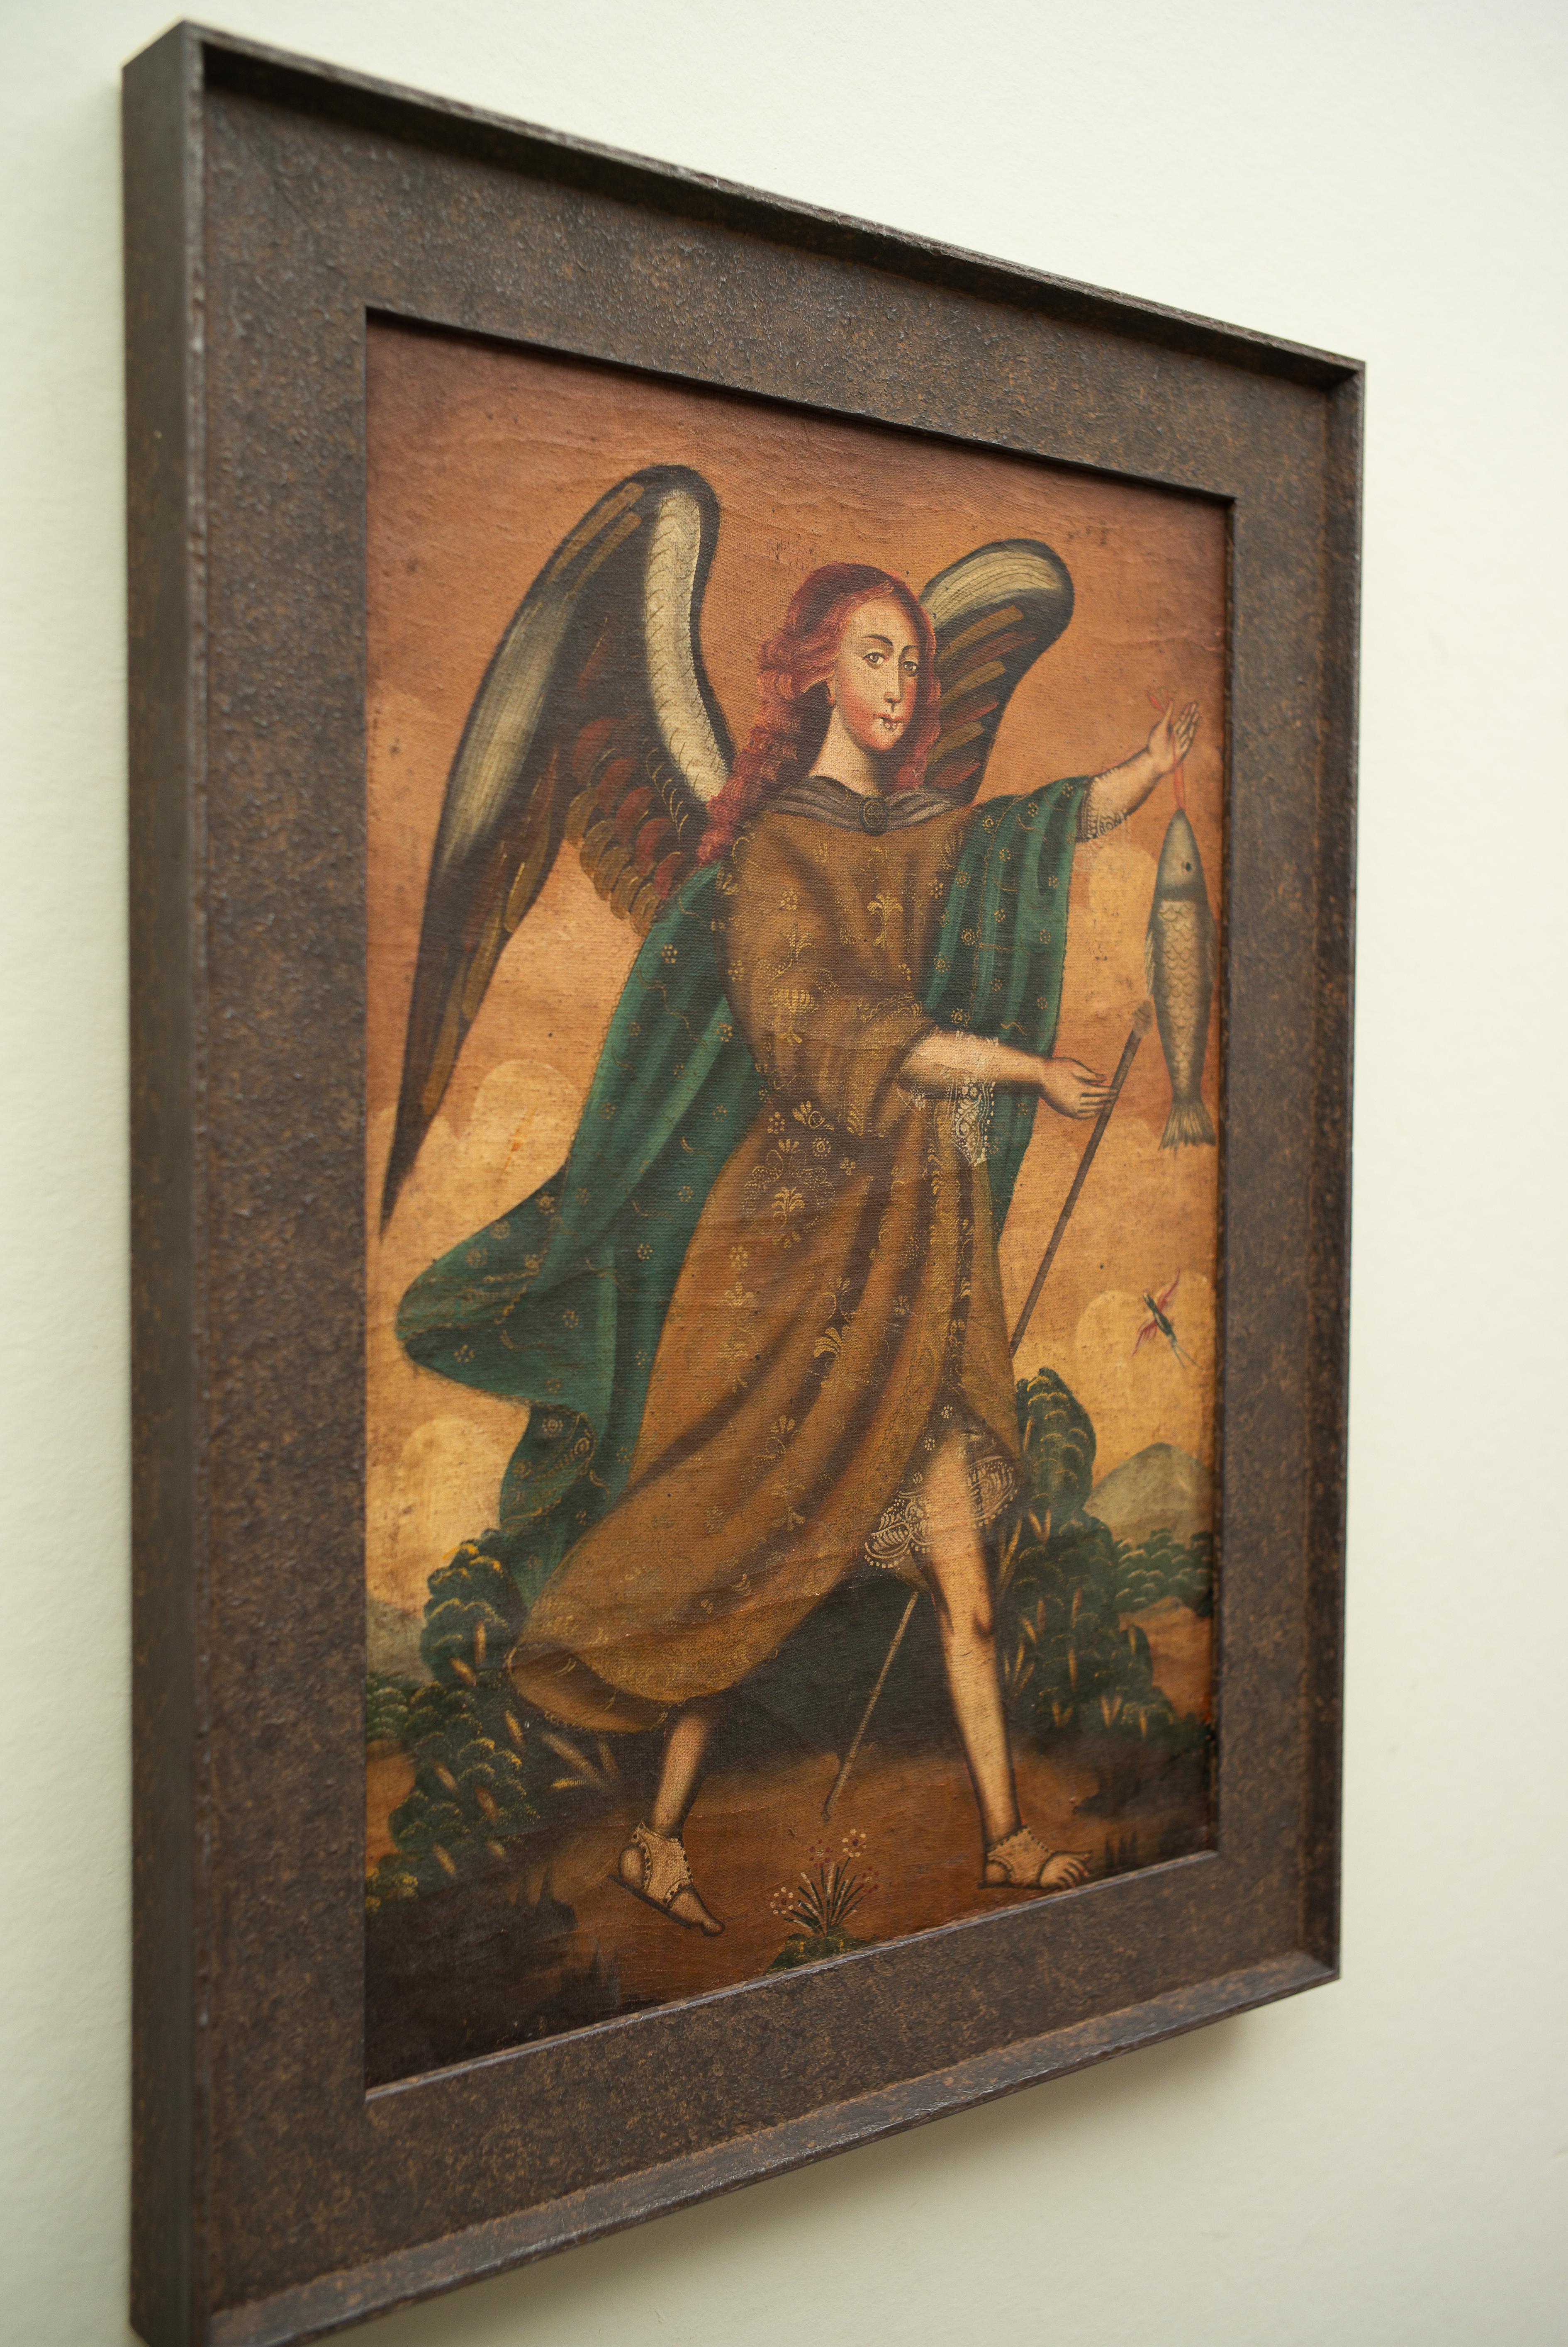 Anonymous, Cuzco School 

A Portrait of Archangel Raphael With Fish

oil on canvas
1800s
canvas dimensions 22.24 x 15.74 inches (56.5 x 40 cm)
frame 26.77 x 20.47 inches (68 x 52 cm)

Provenance:
A Swedish private collection

